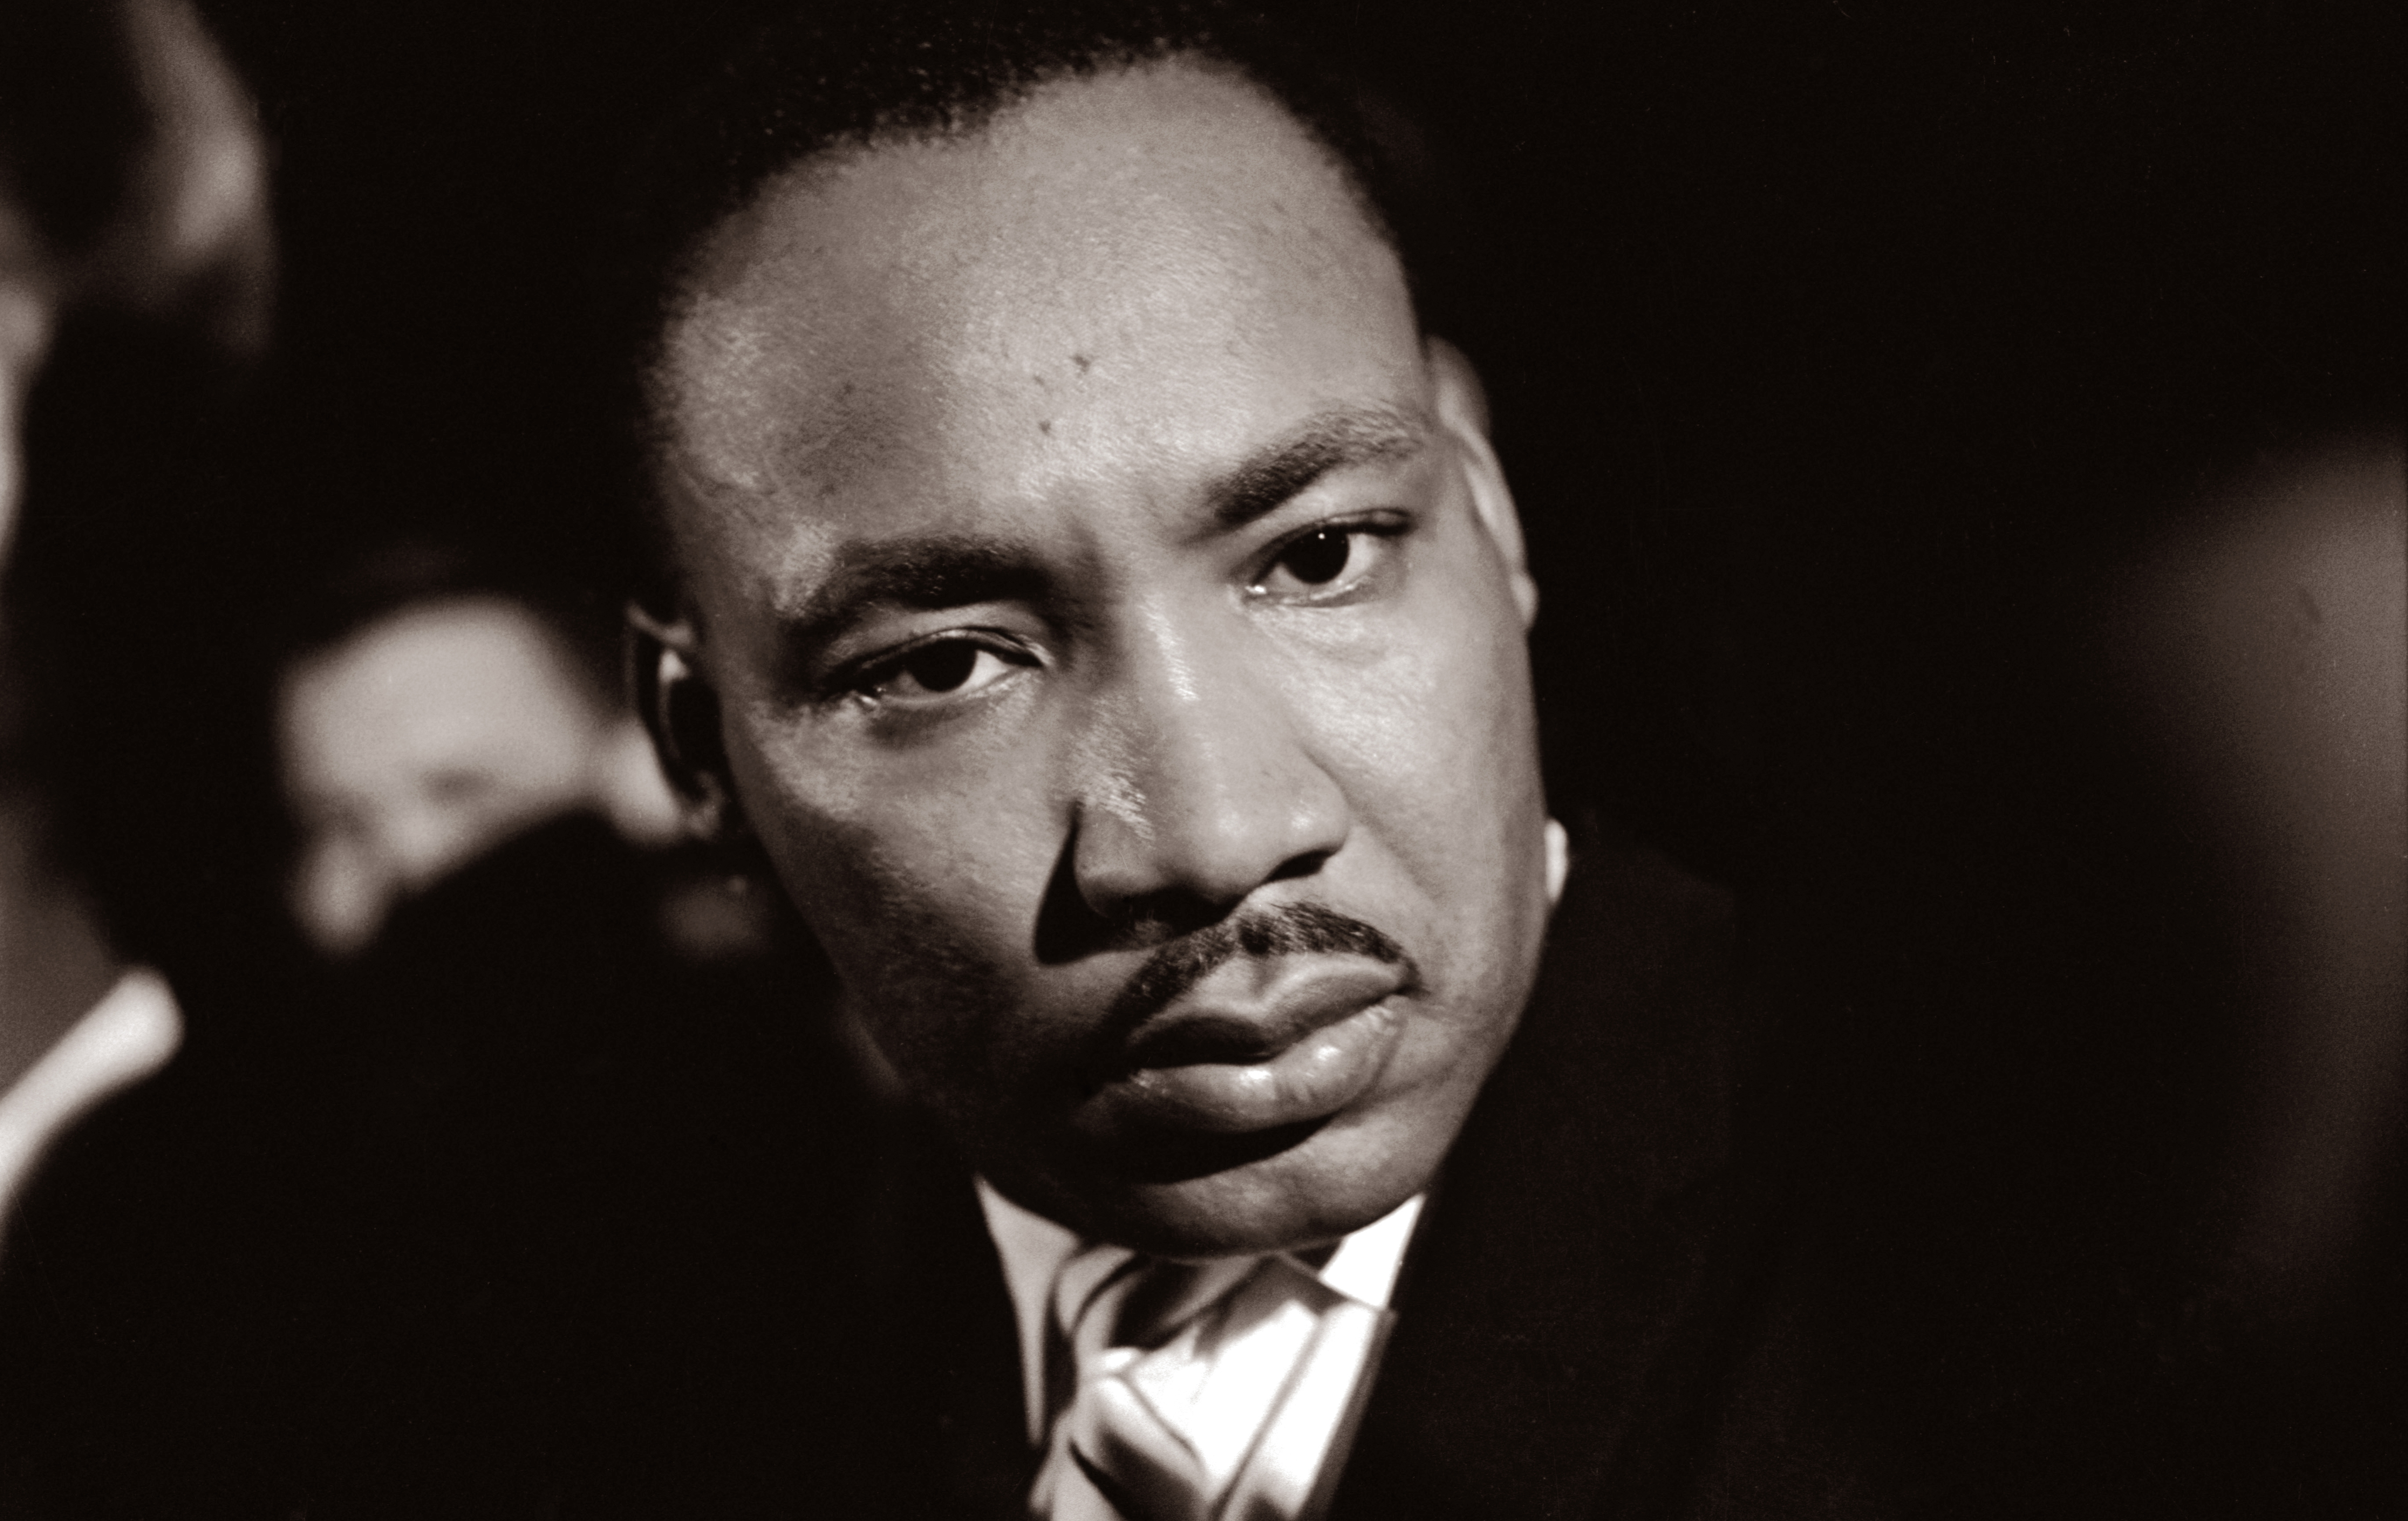 Martin Luther King, Jr.  image link to story